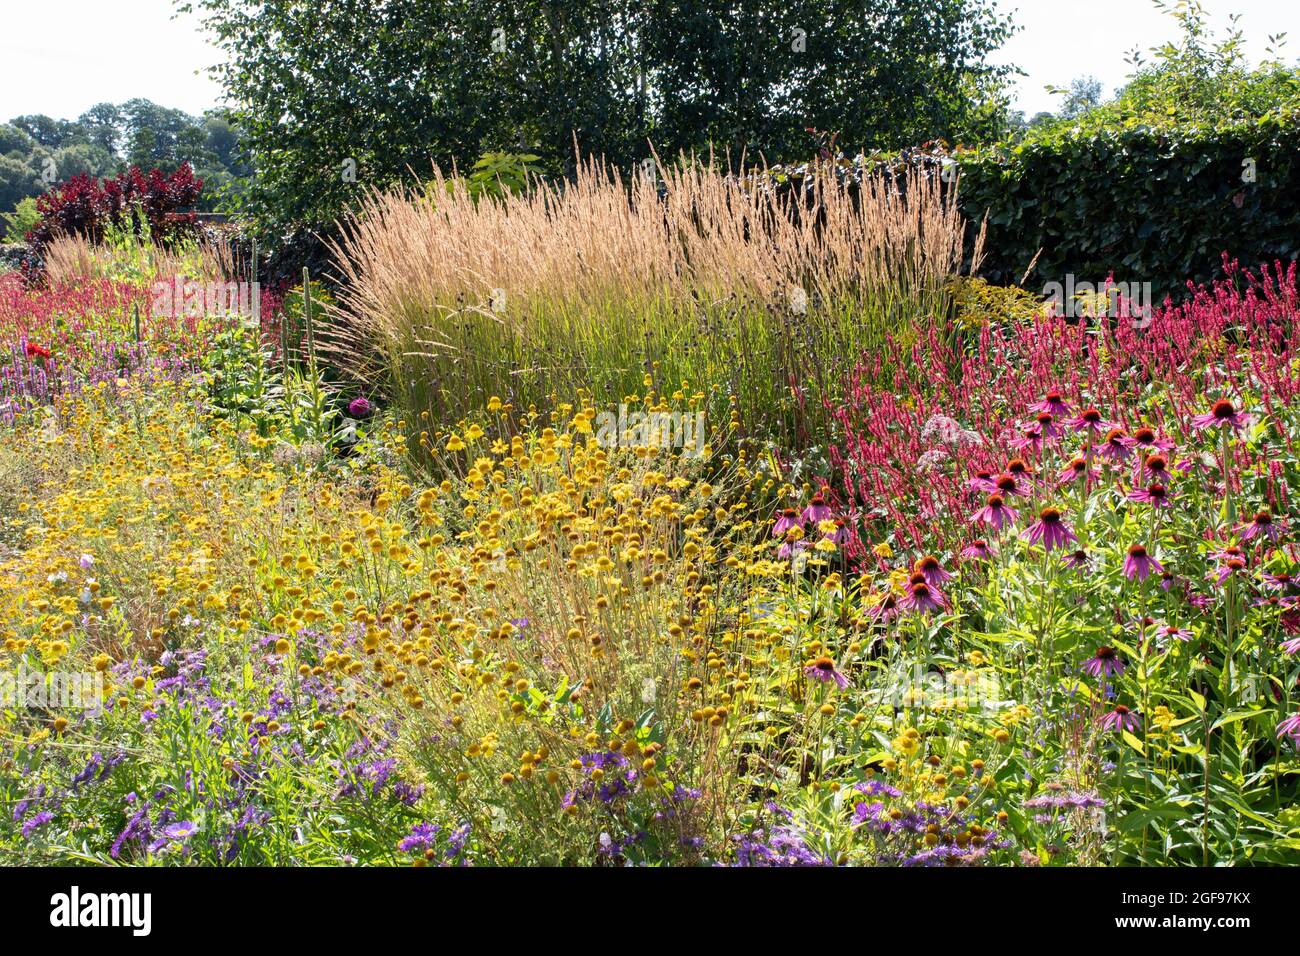 The Hot Border at Helmsley Walled Garden Stock Photo